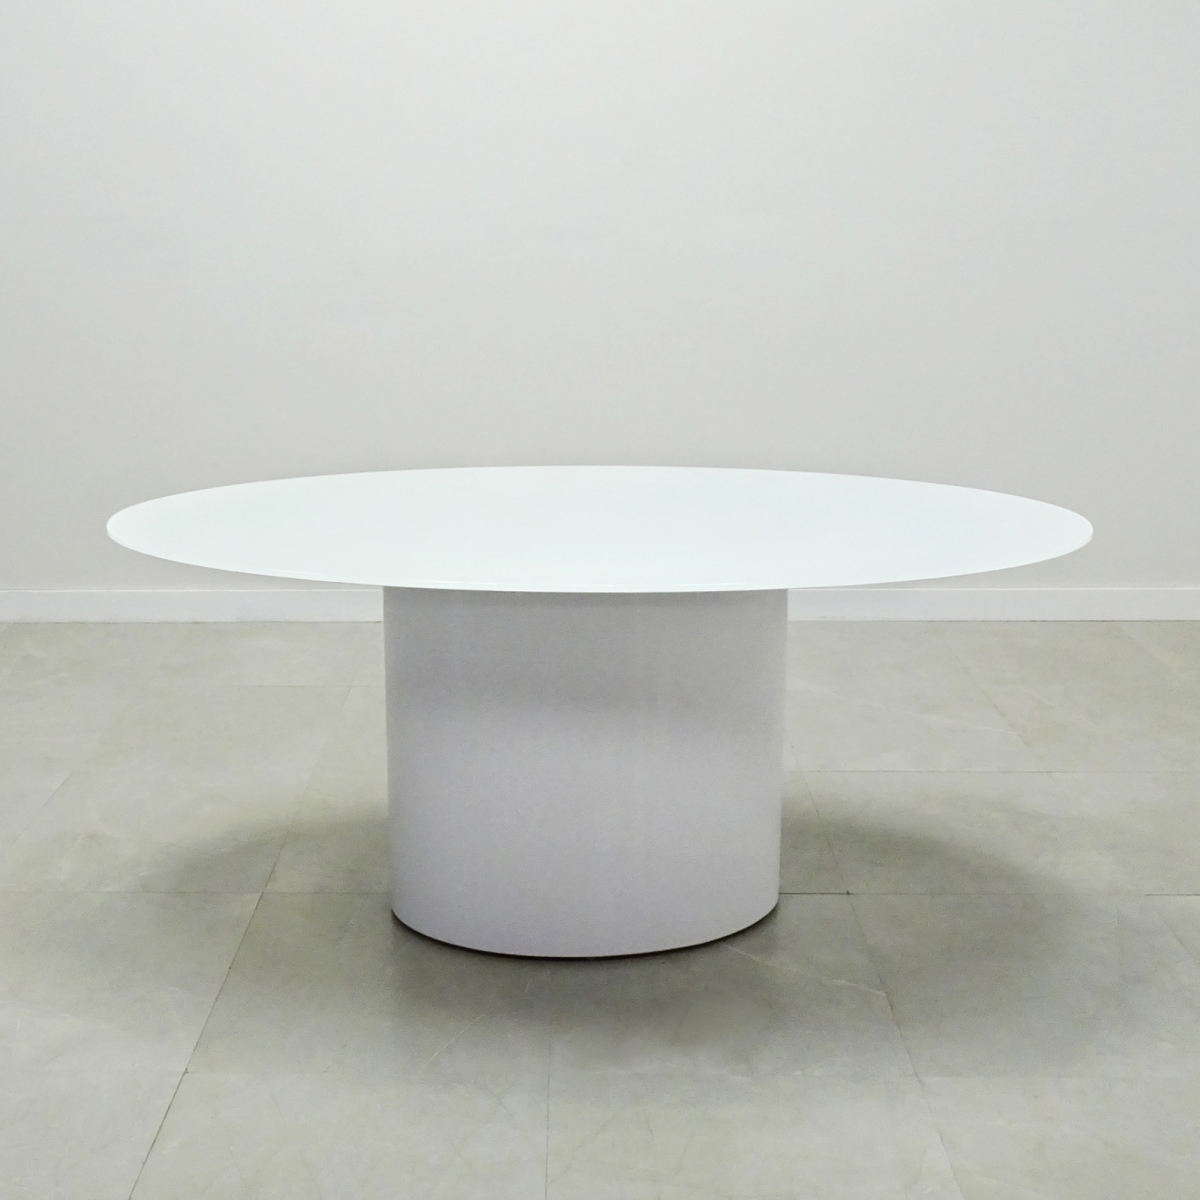 Axis Oval Conference Table With Glass Top